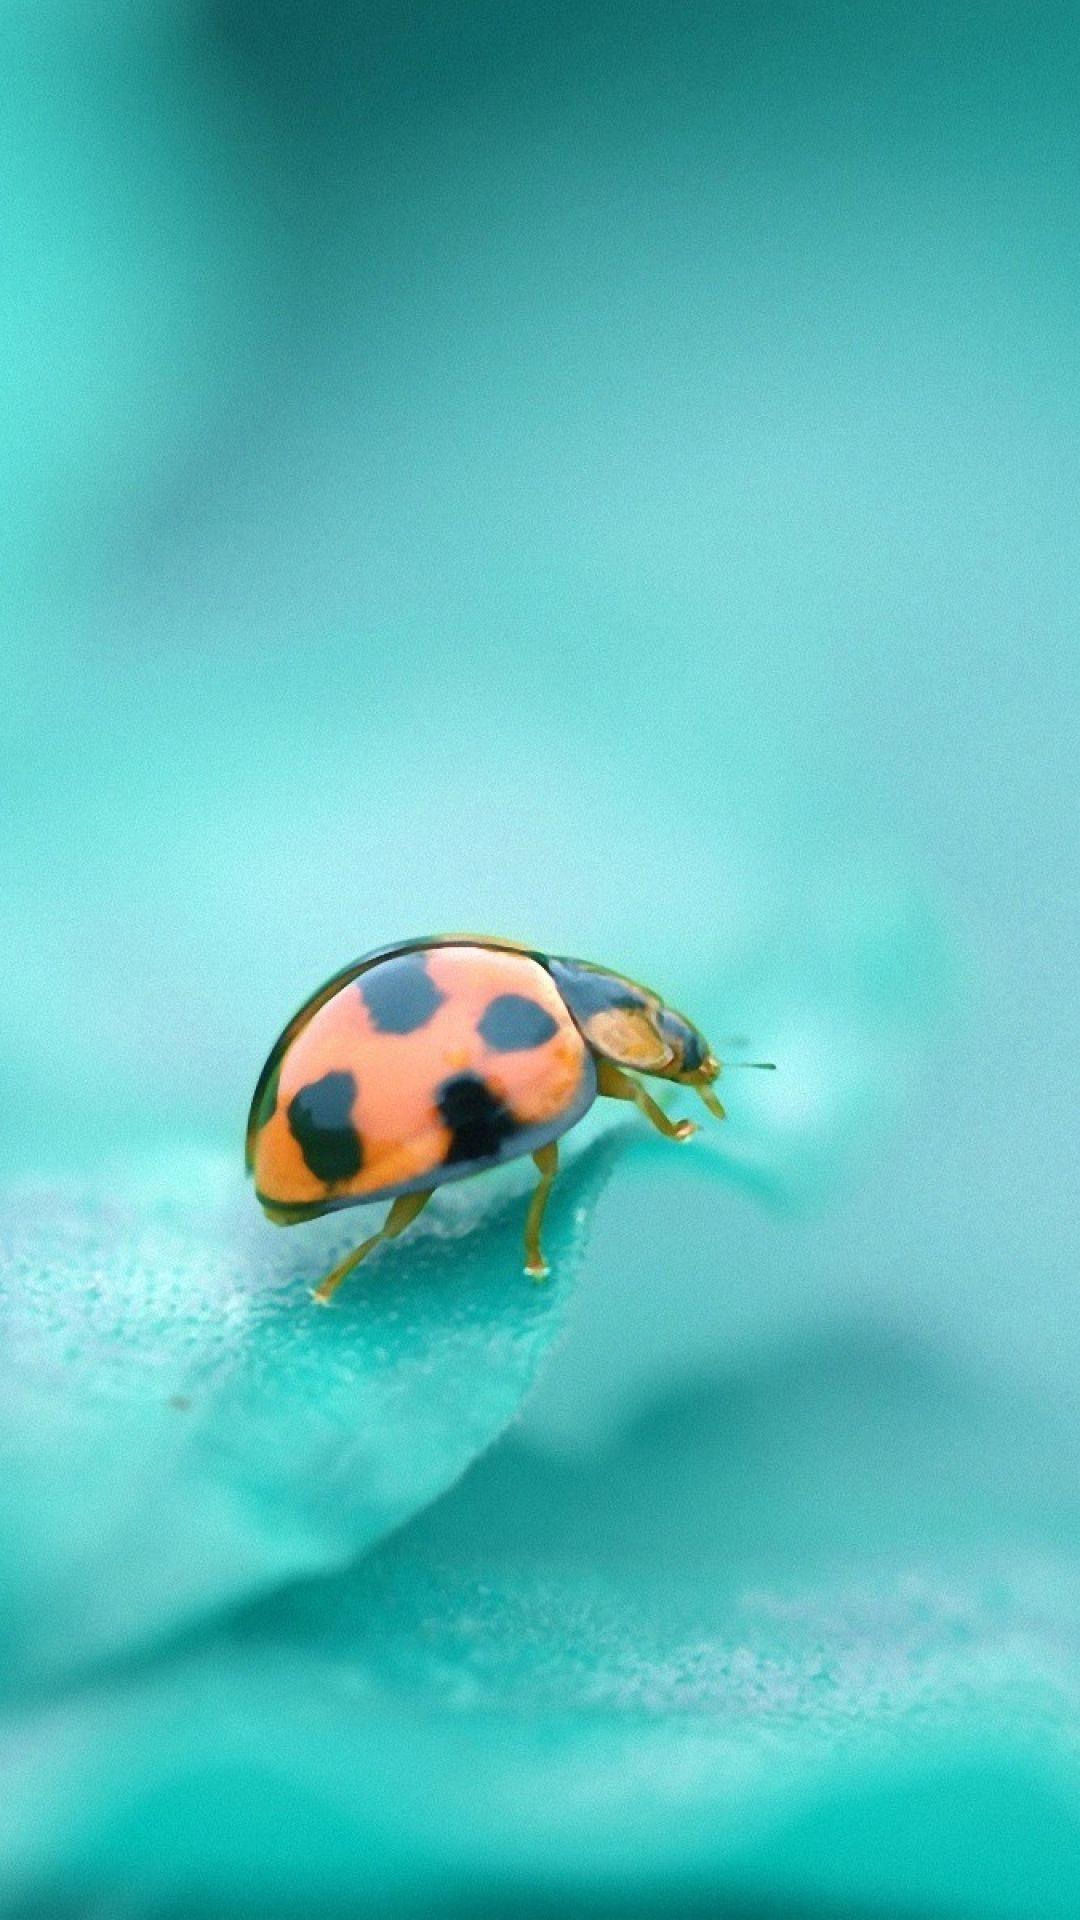 Seamless Ladybird Wallpaper Stock Photo, Picture and Royalty Free Image.  Image 15502444.